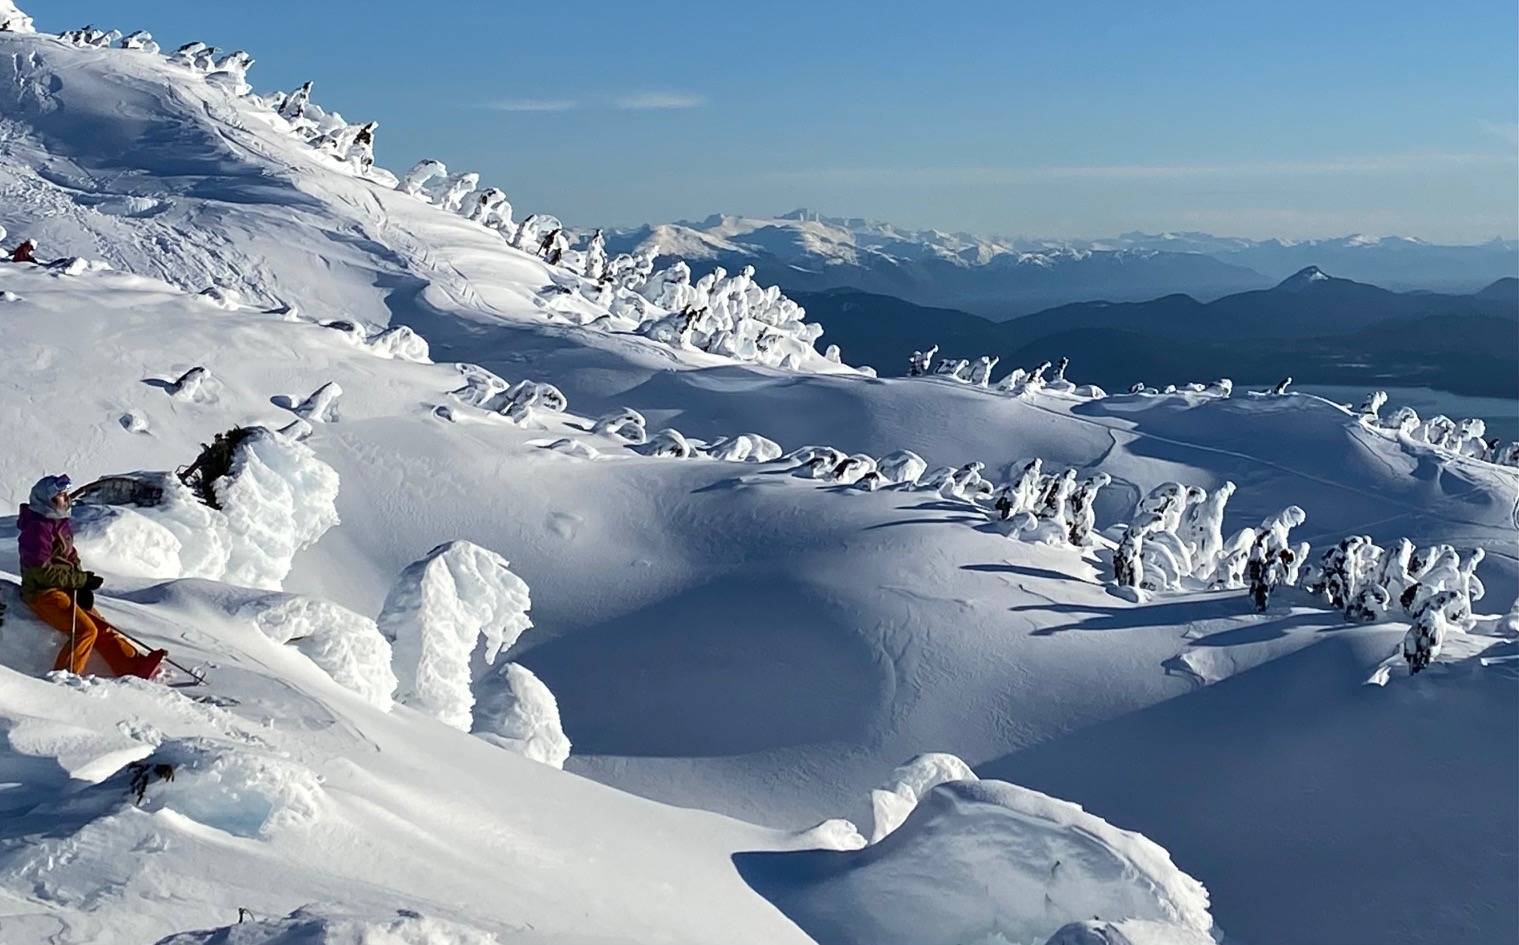 This photo shows the top of the ridge at Eaglecrest looking south towards Seymour canal on Jan. 31. (Courtesy Photo / Ben Ng and KD Magnum)